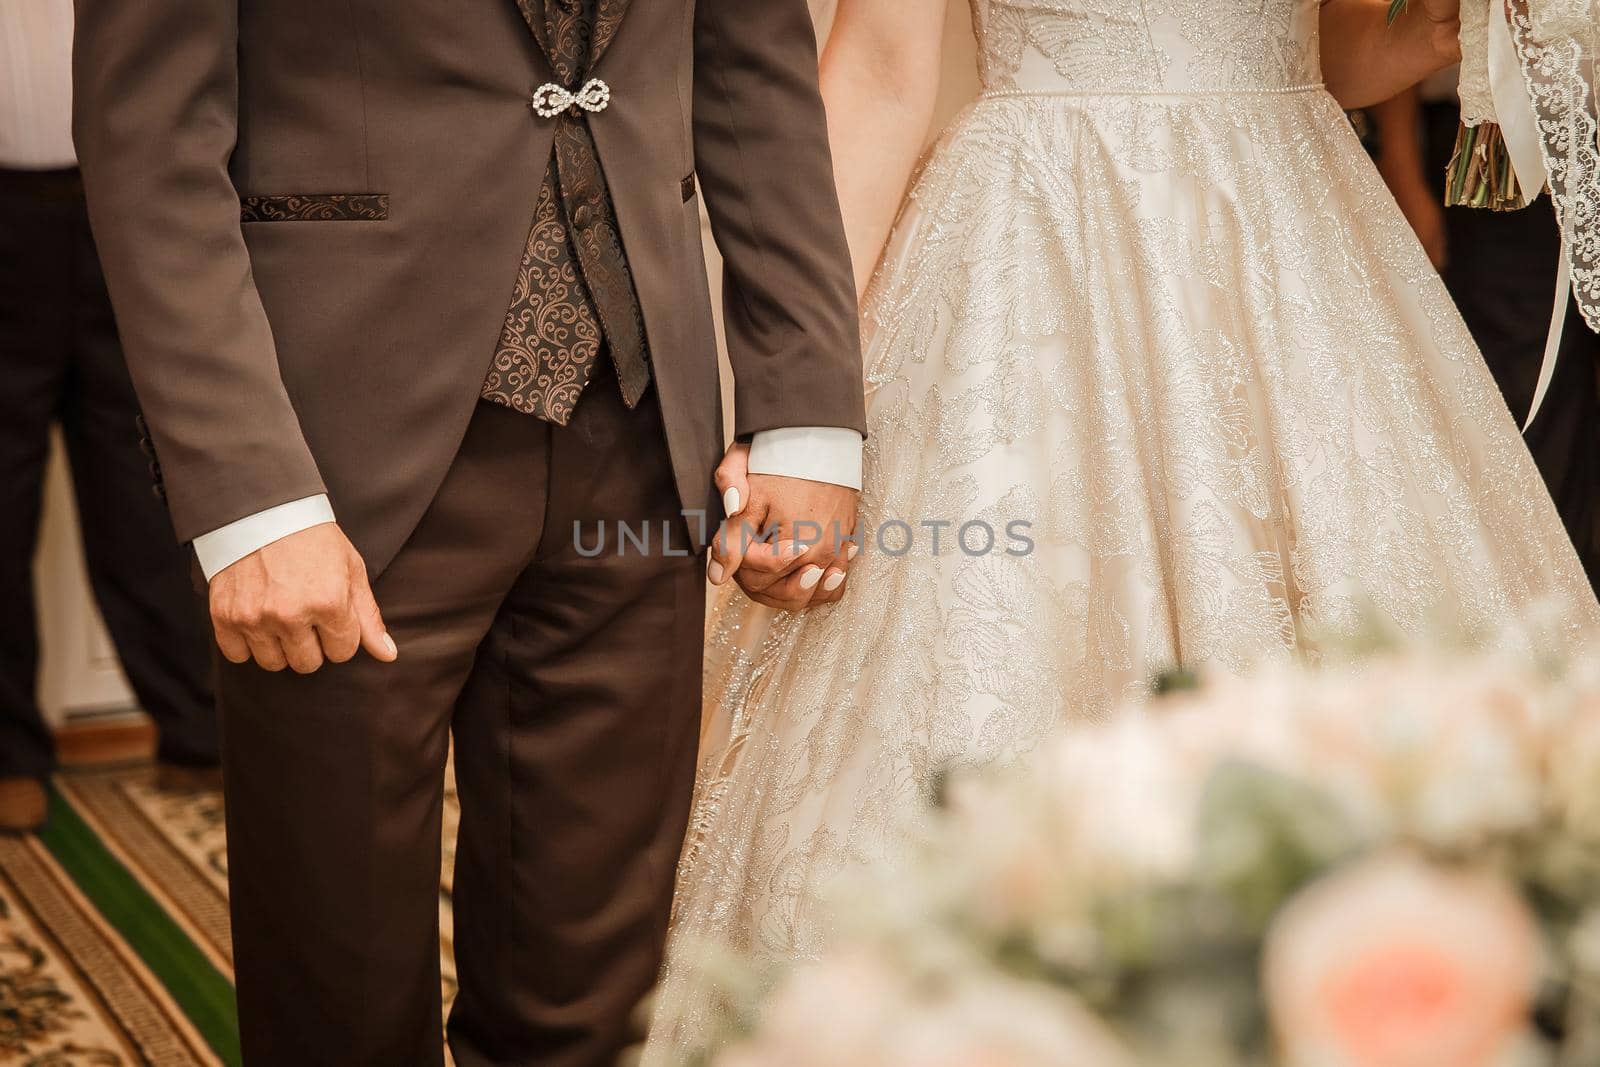 The groom in a brown suit holds the bride's hand tightly.